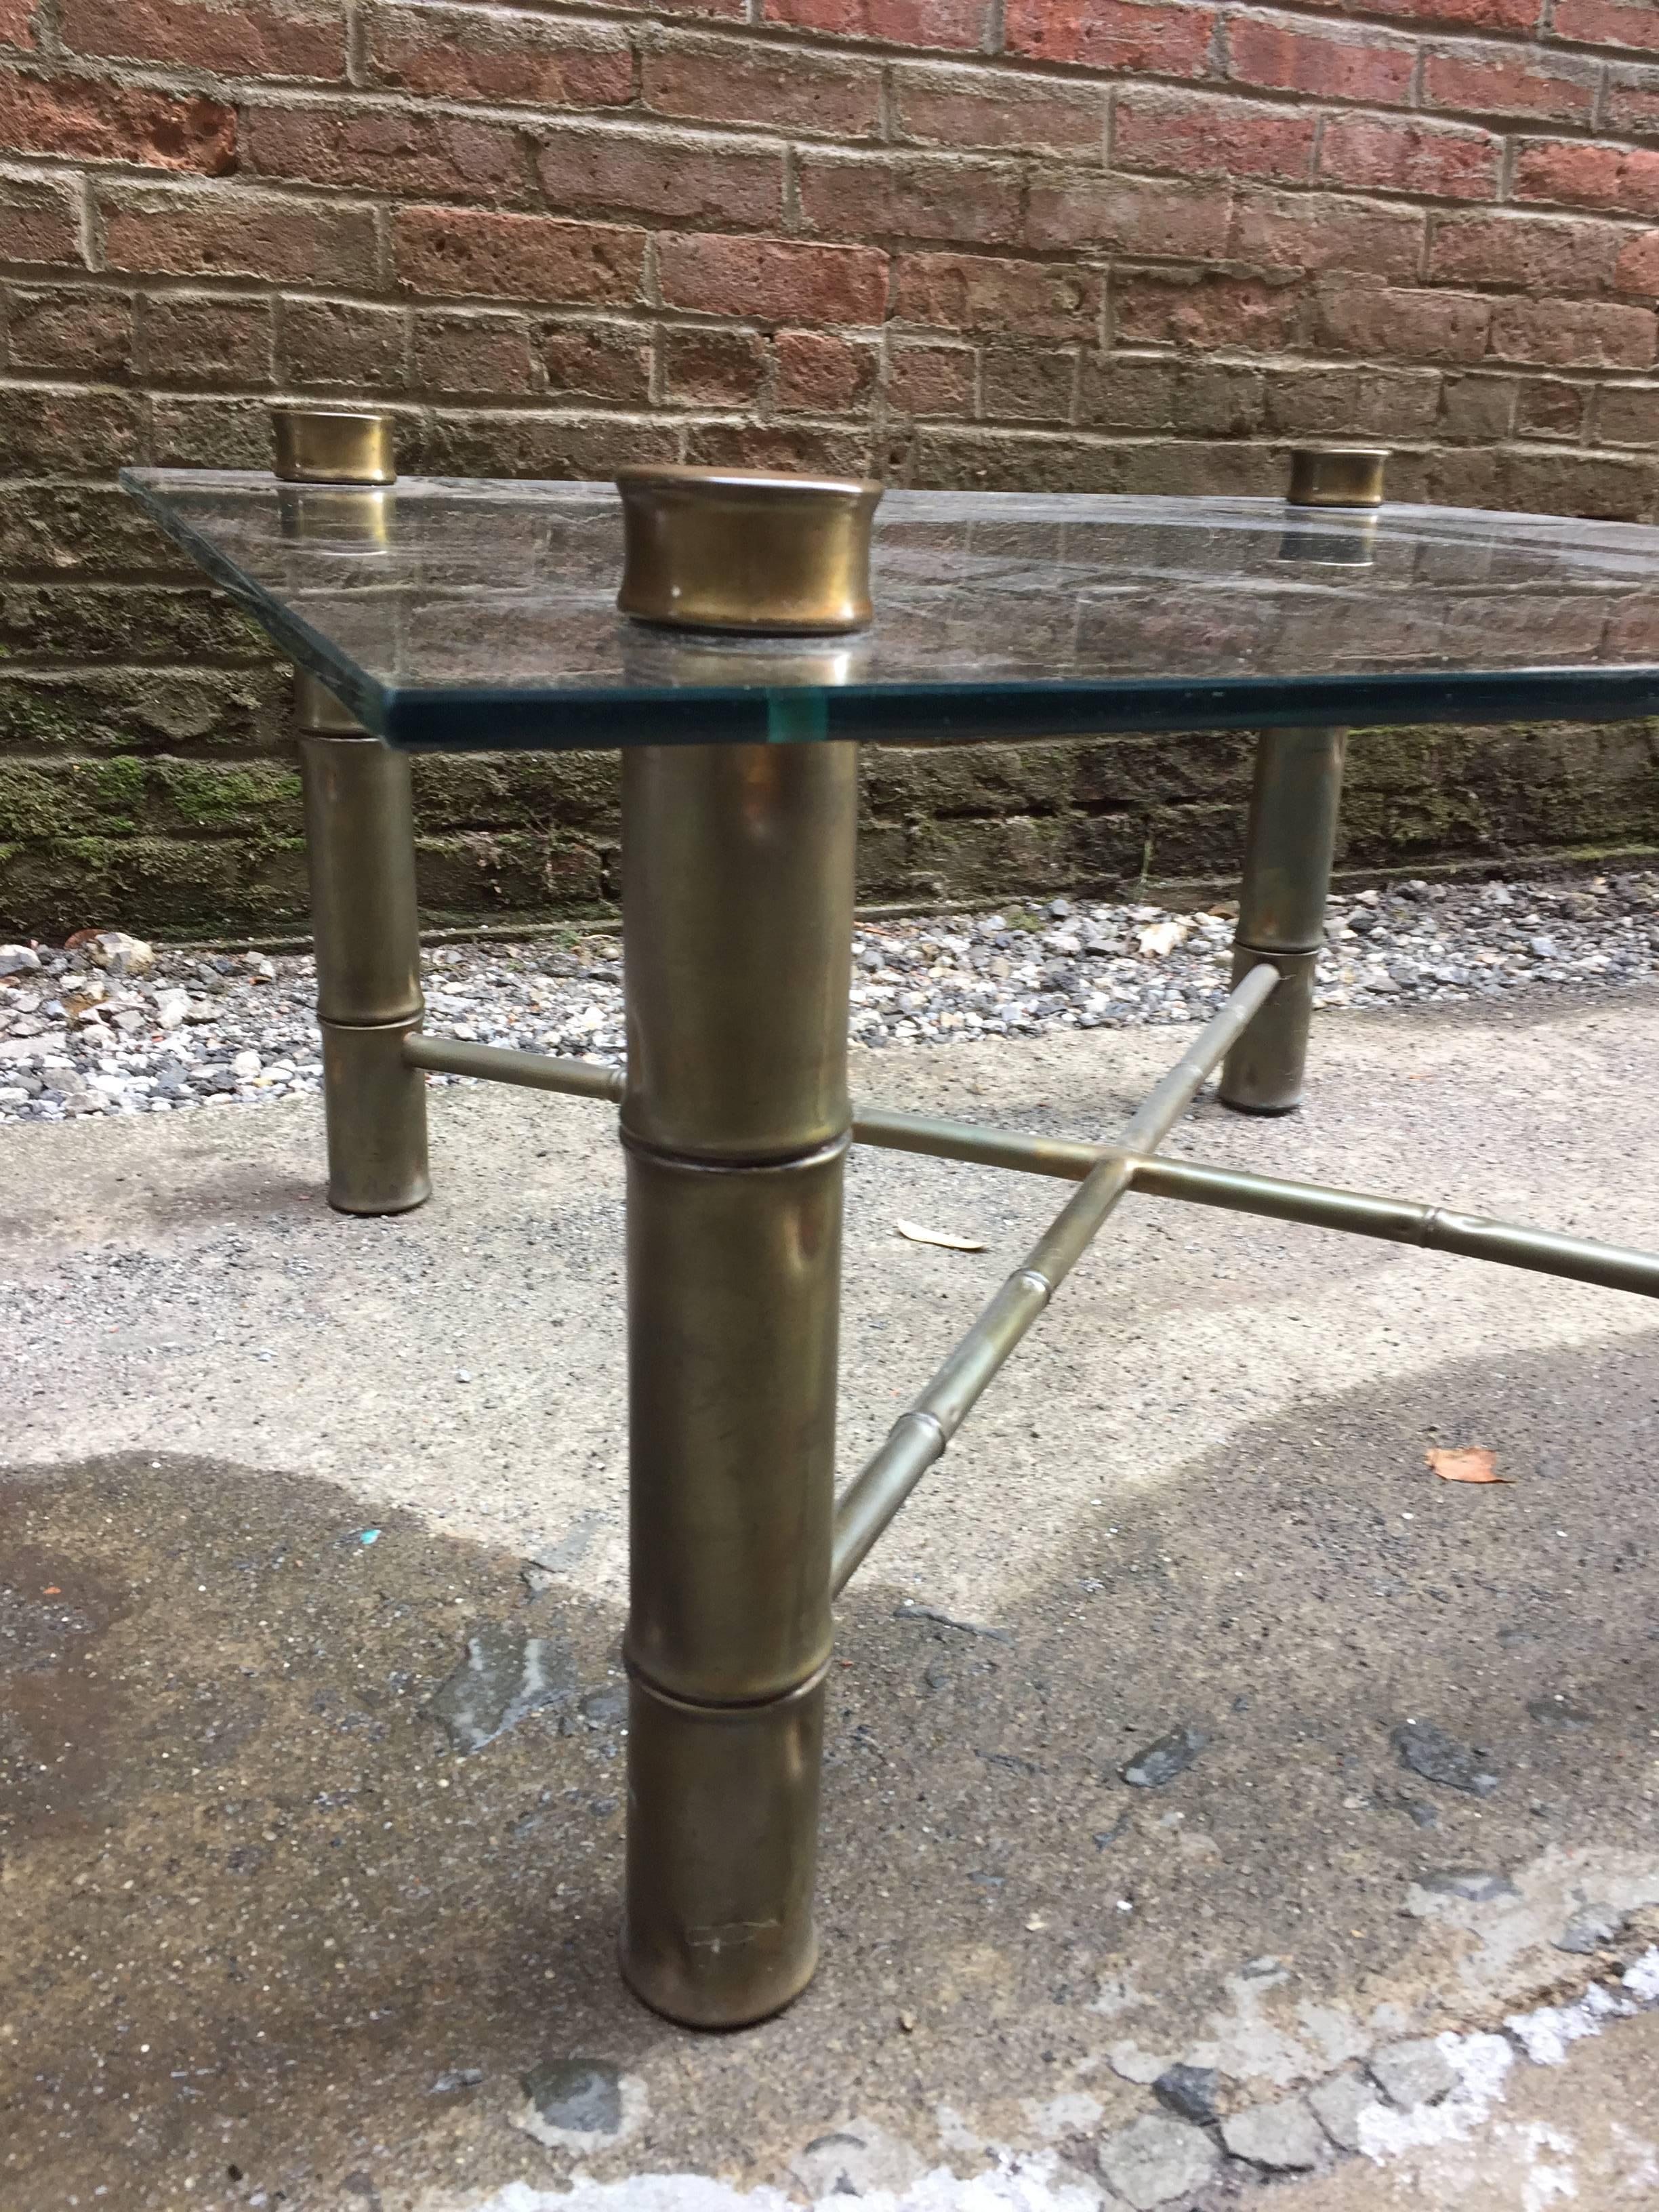 Brass legs with glass top coffee table. Circa 1970. Mellow old patina to the brass legs.

32